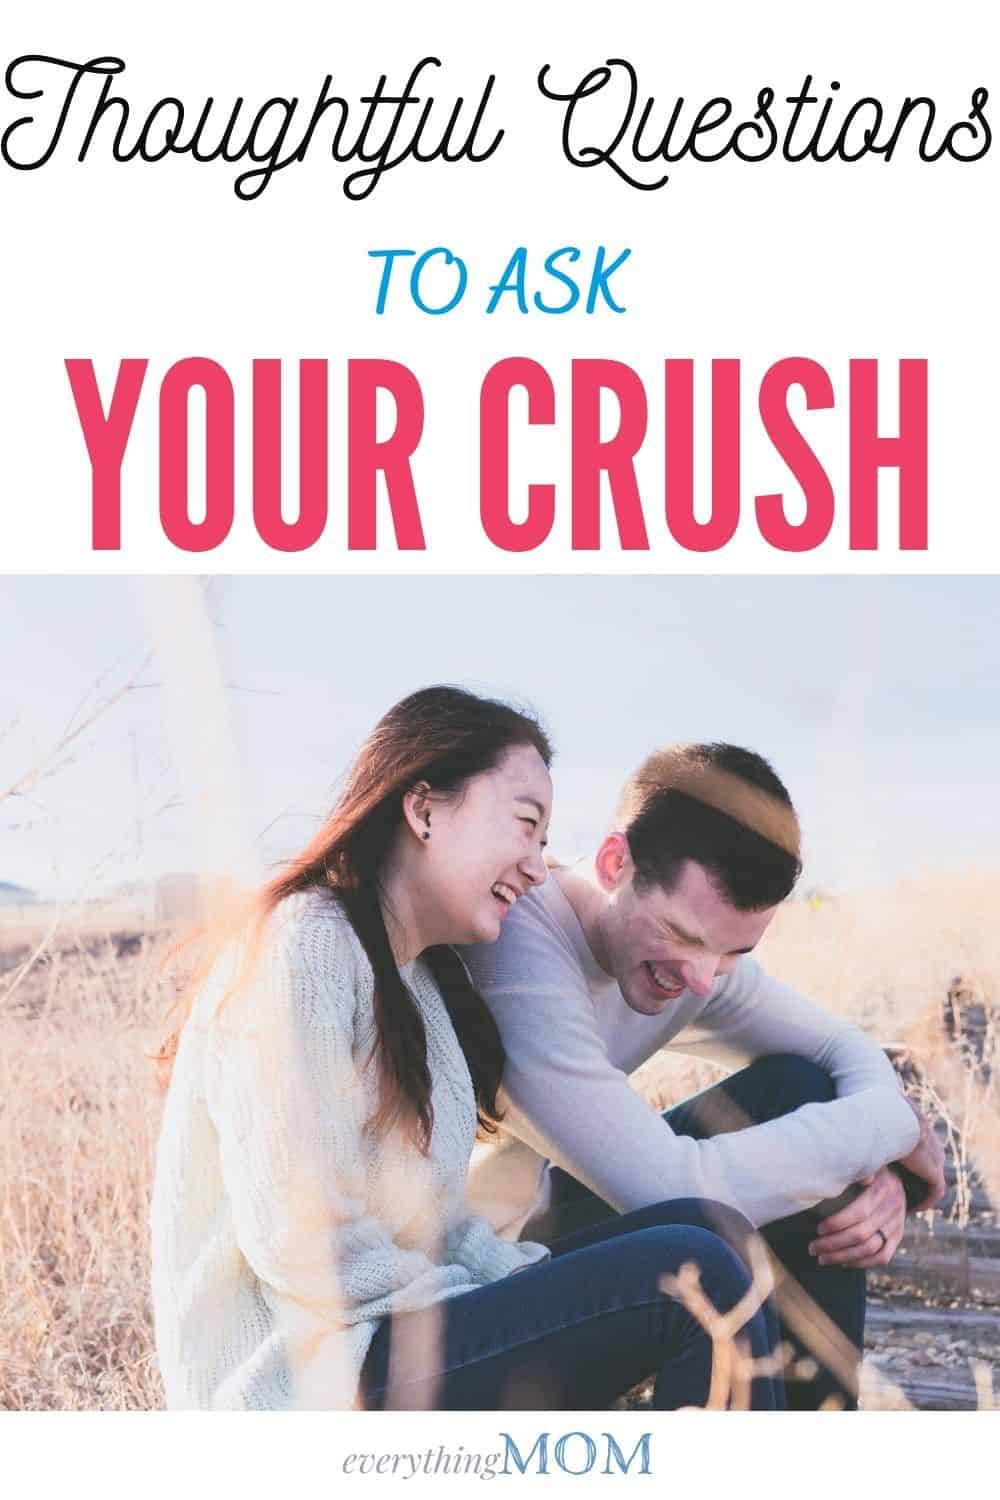 Your crush questions to ask 150 Questions